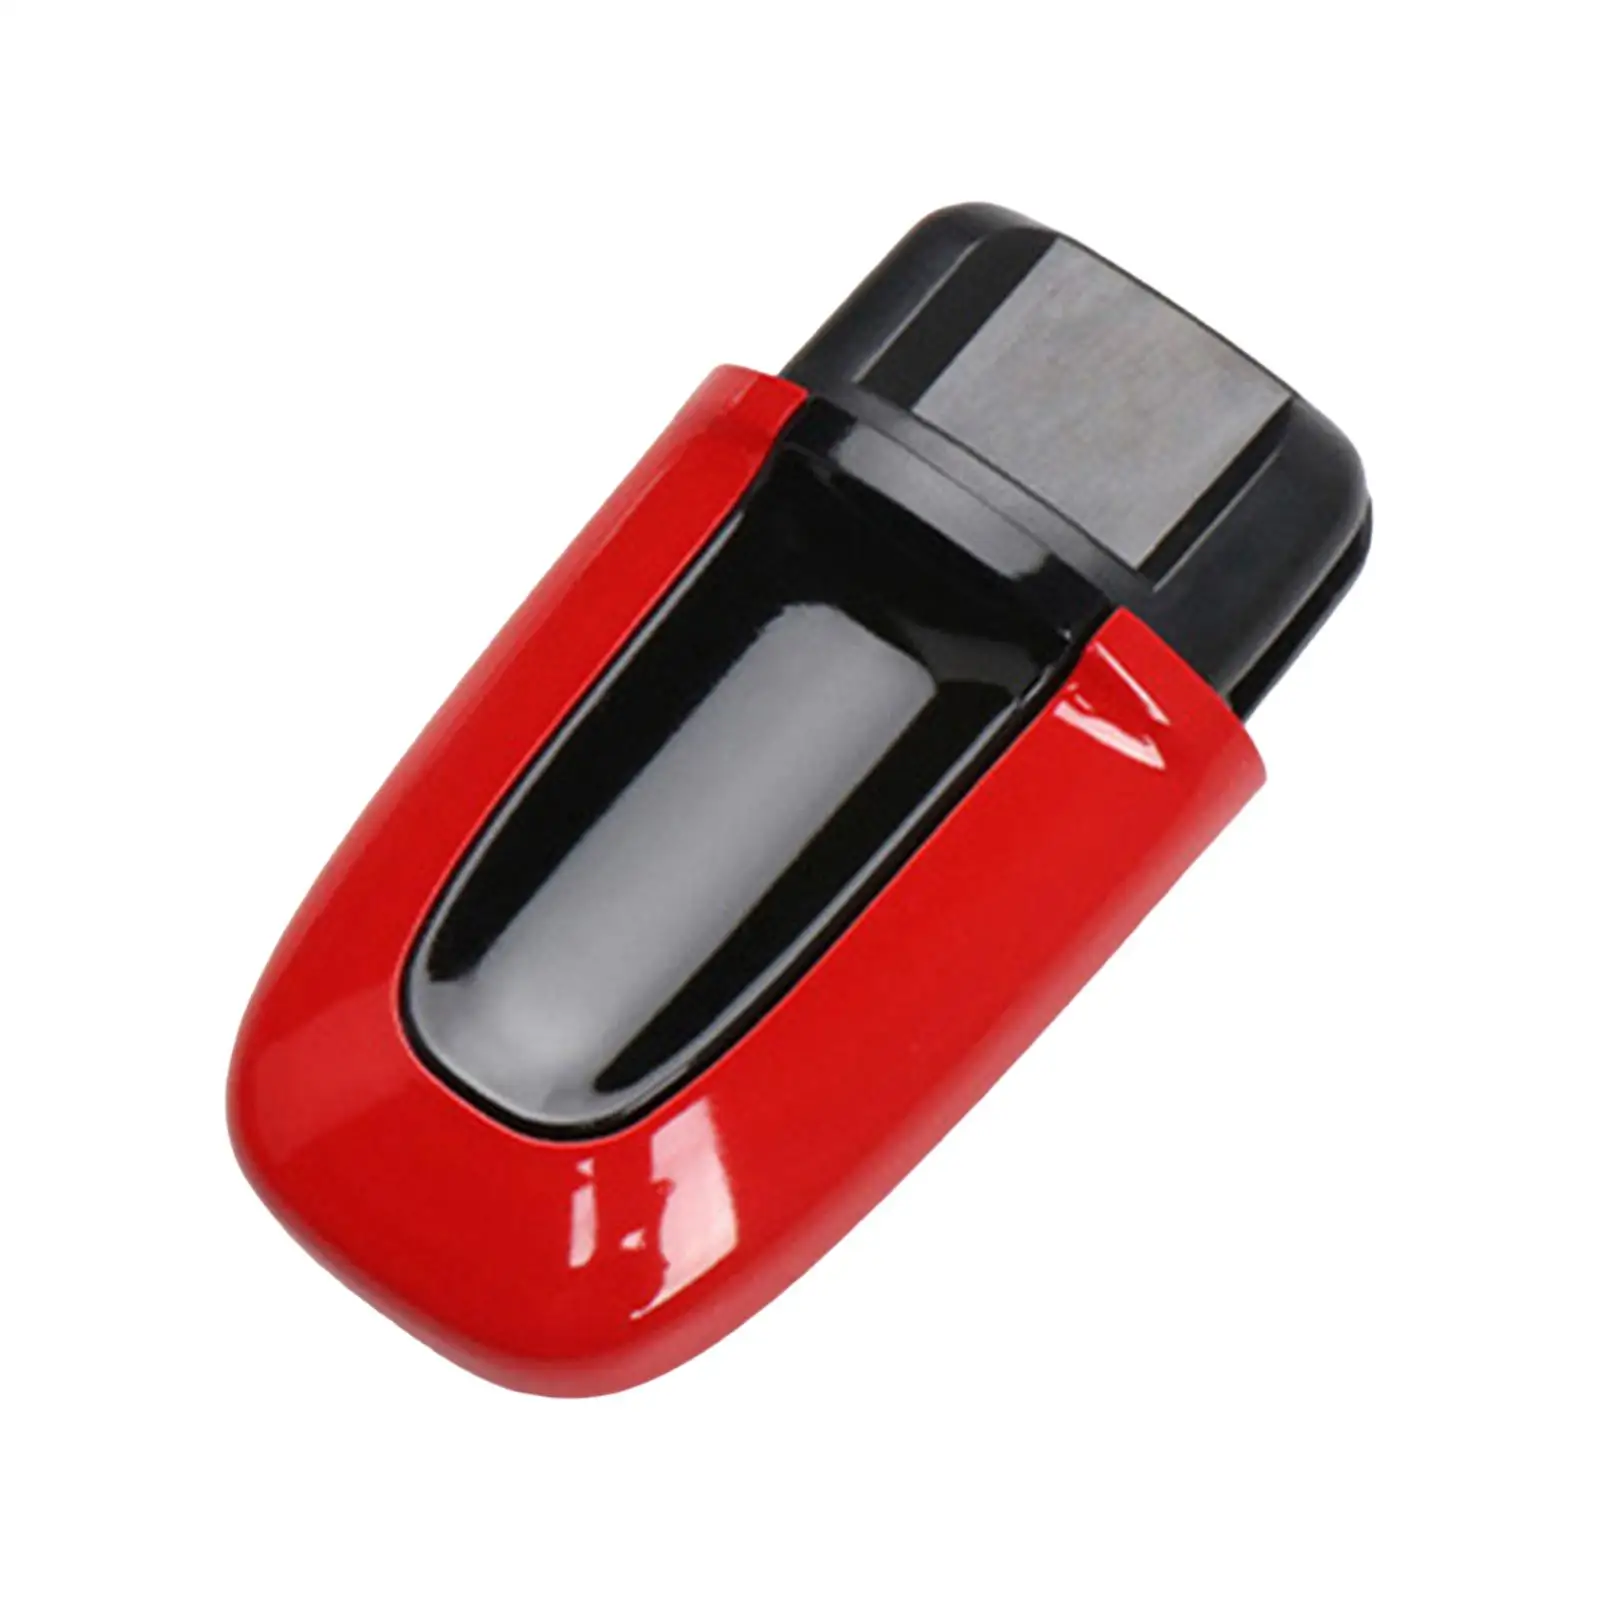 7PP919157A Durable High Performance Premium Entry and Drive Dummy Key Plug Replaces Car Accessories for Cayman 2013 and up